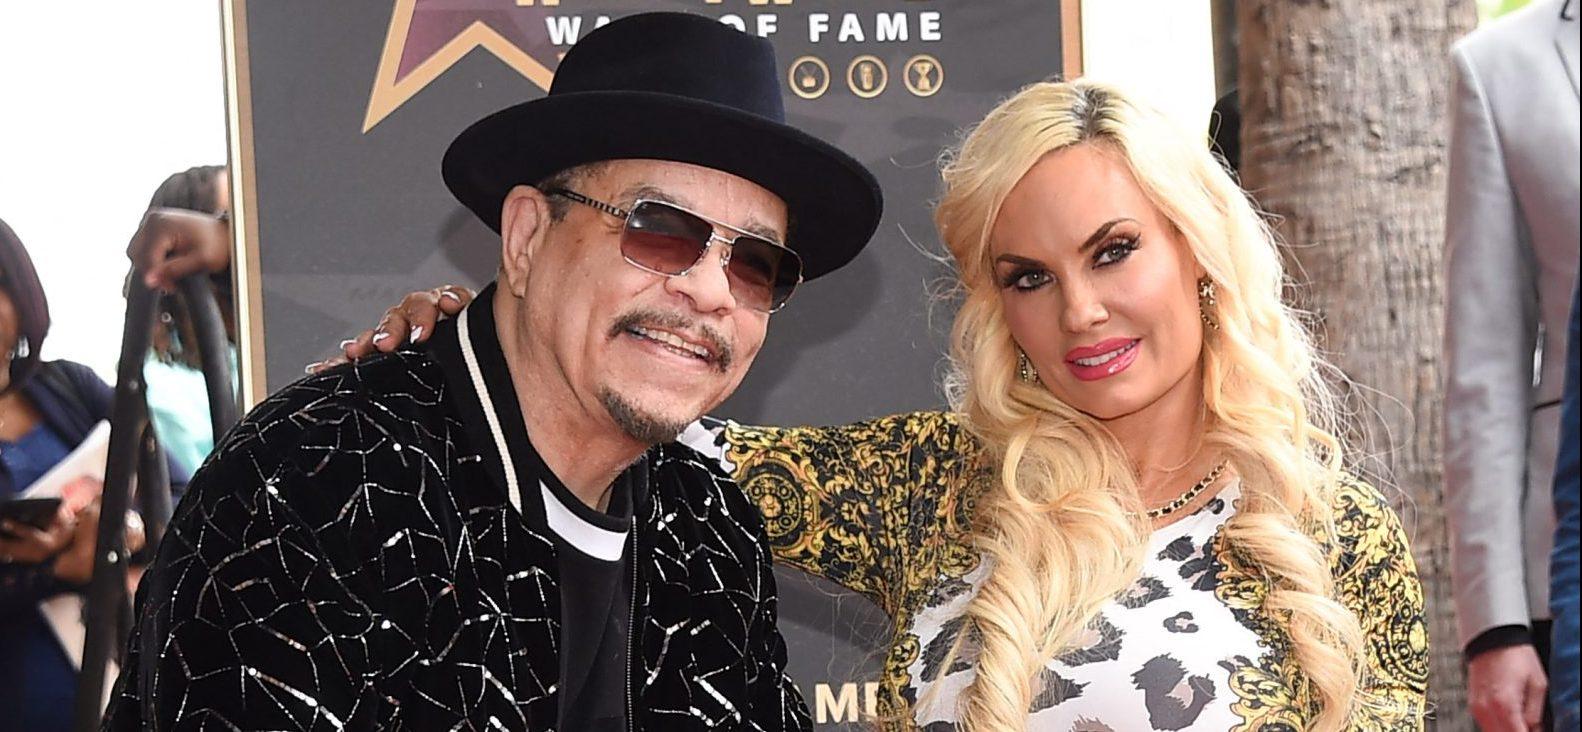 ICE-T'S WIFE, COCO AUSTIN, AND DAUGHTER HAVE LOADS OF FUN IN A DANCE-OFF